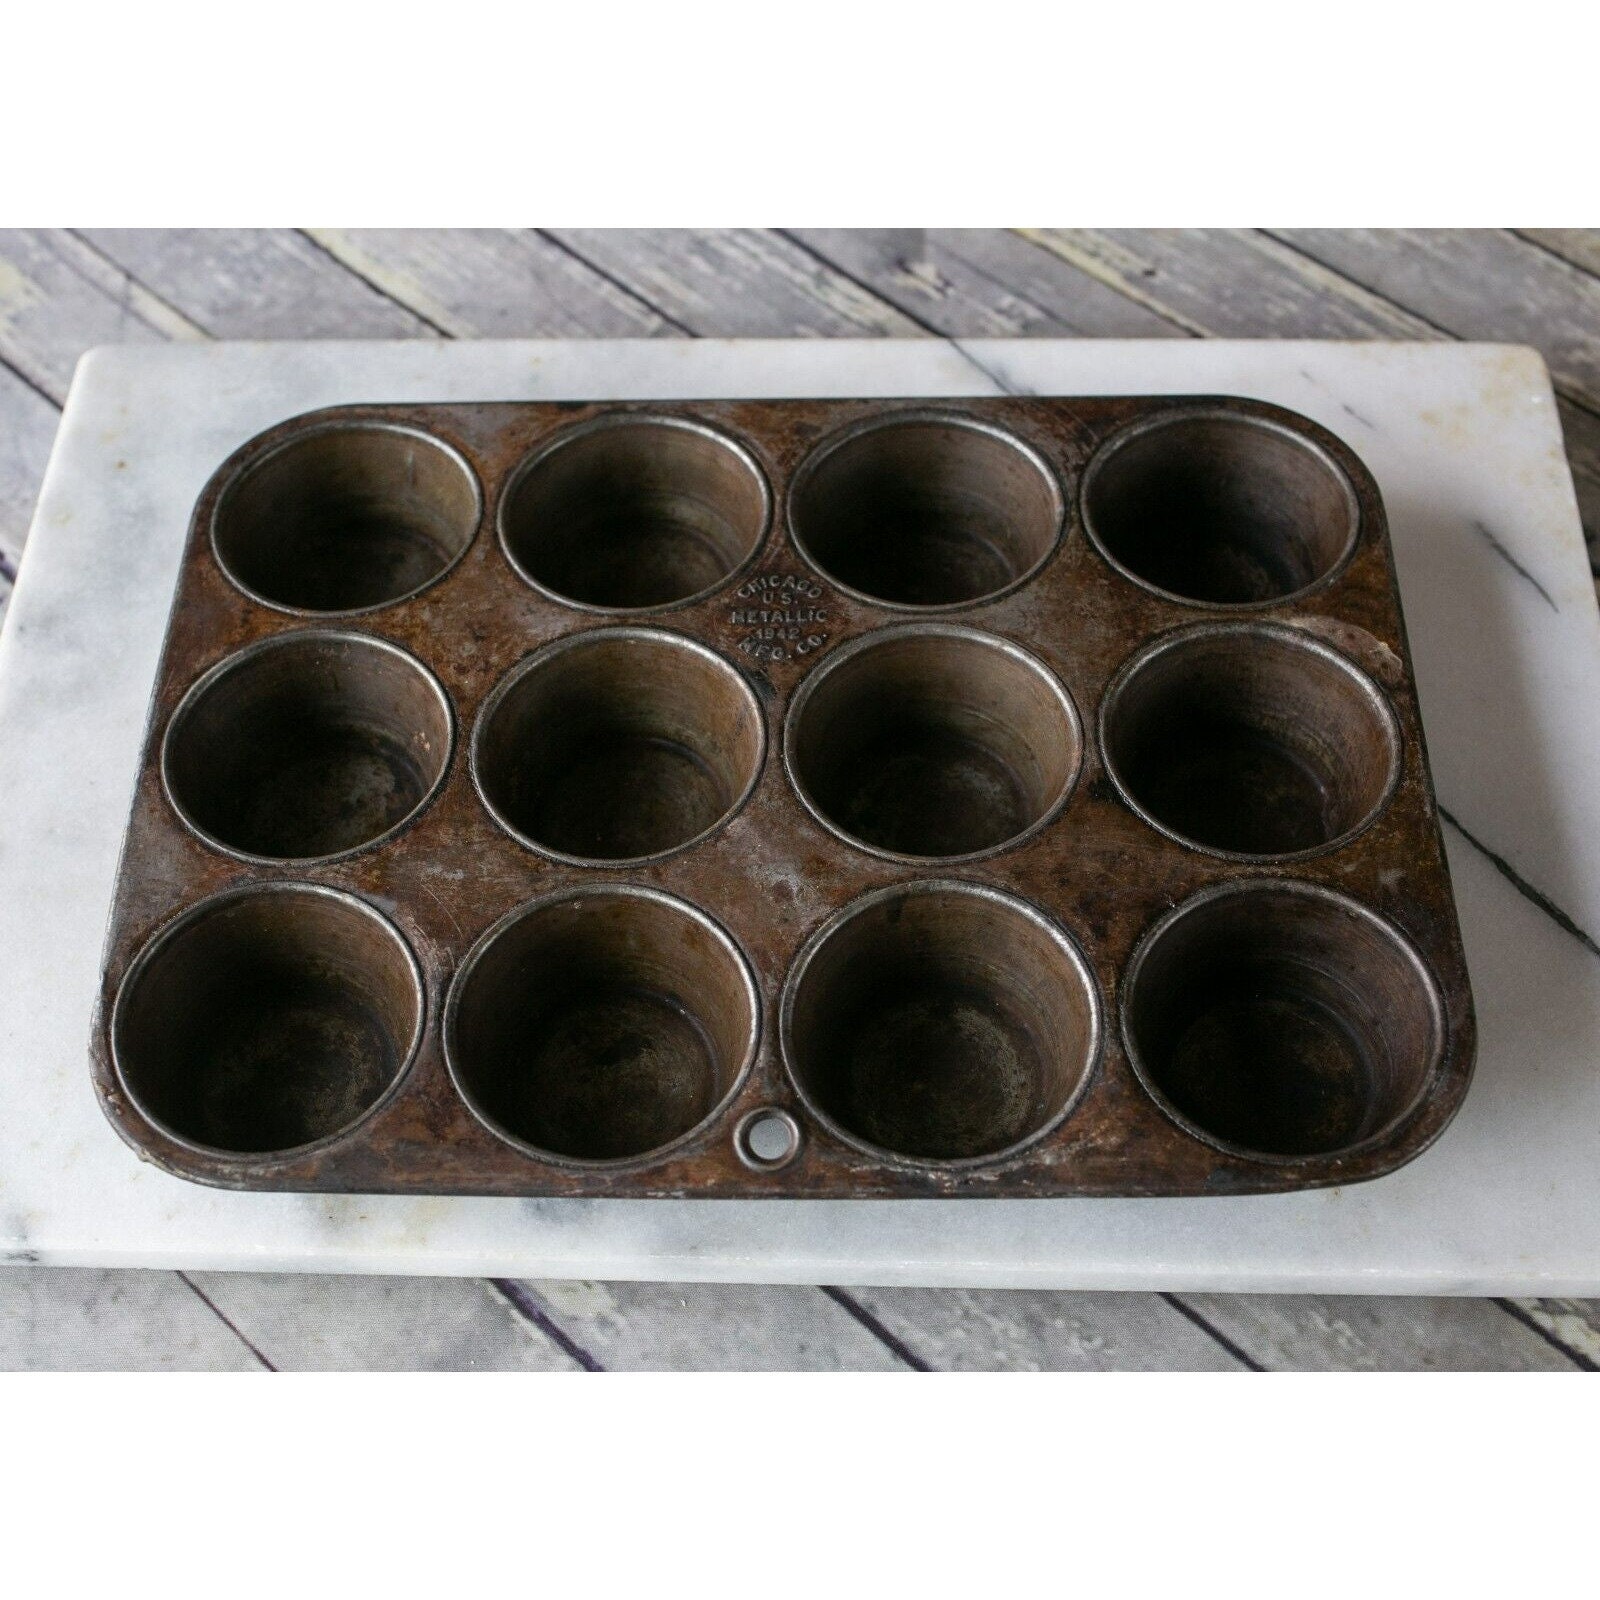 Vintage Muffin Pan 6 Cup Ekcology Silver Beauty , No T 66-6